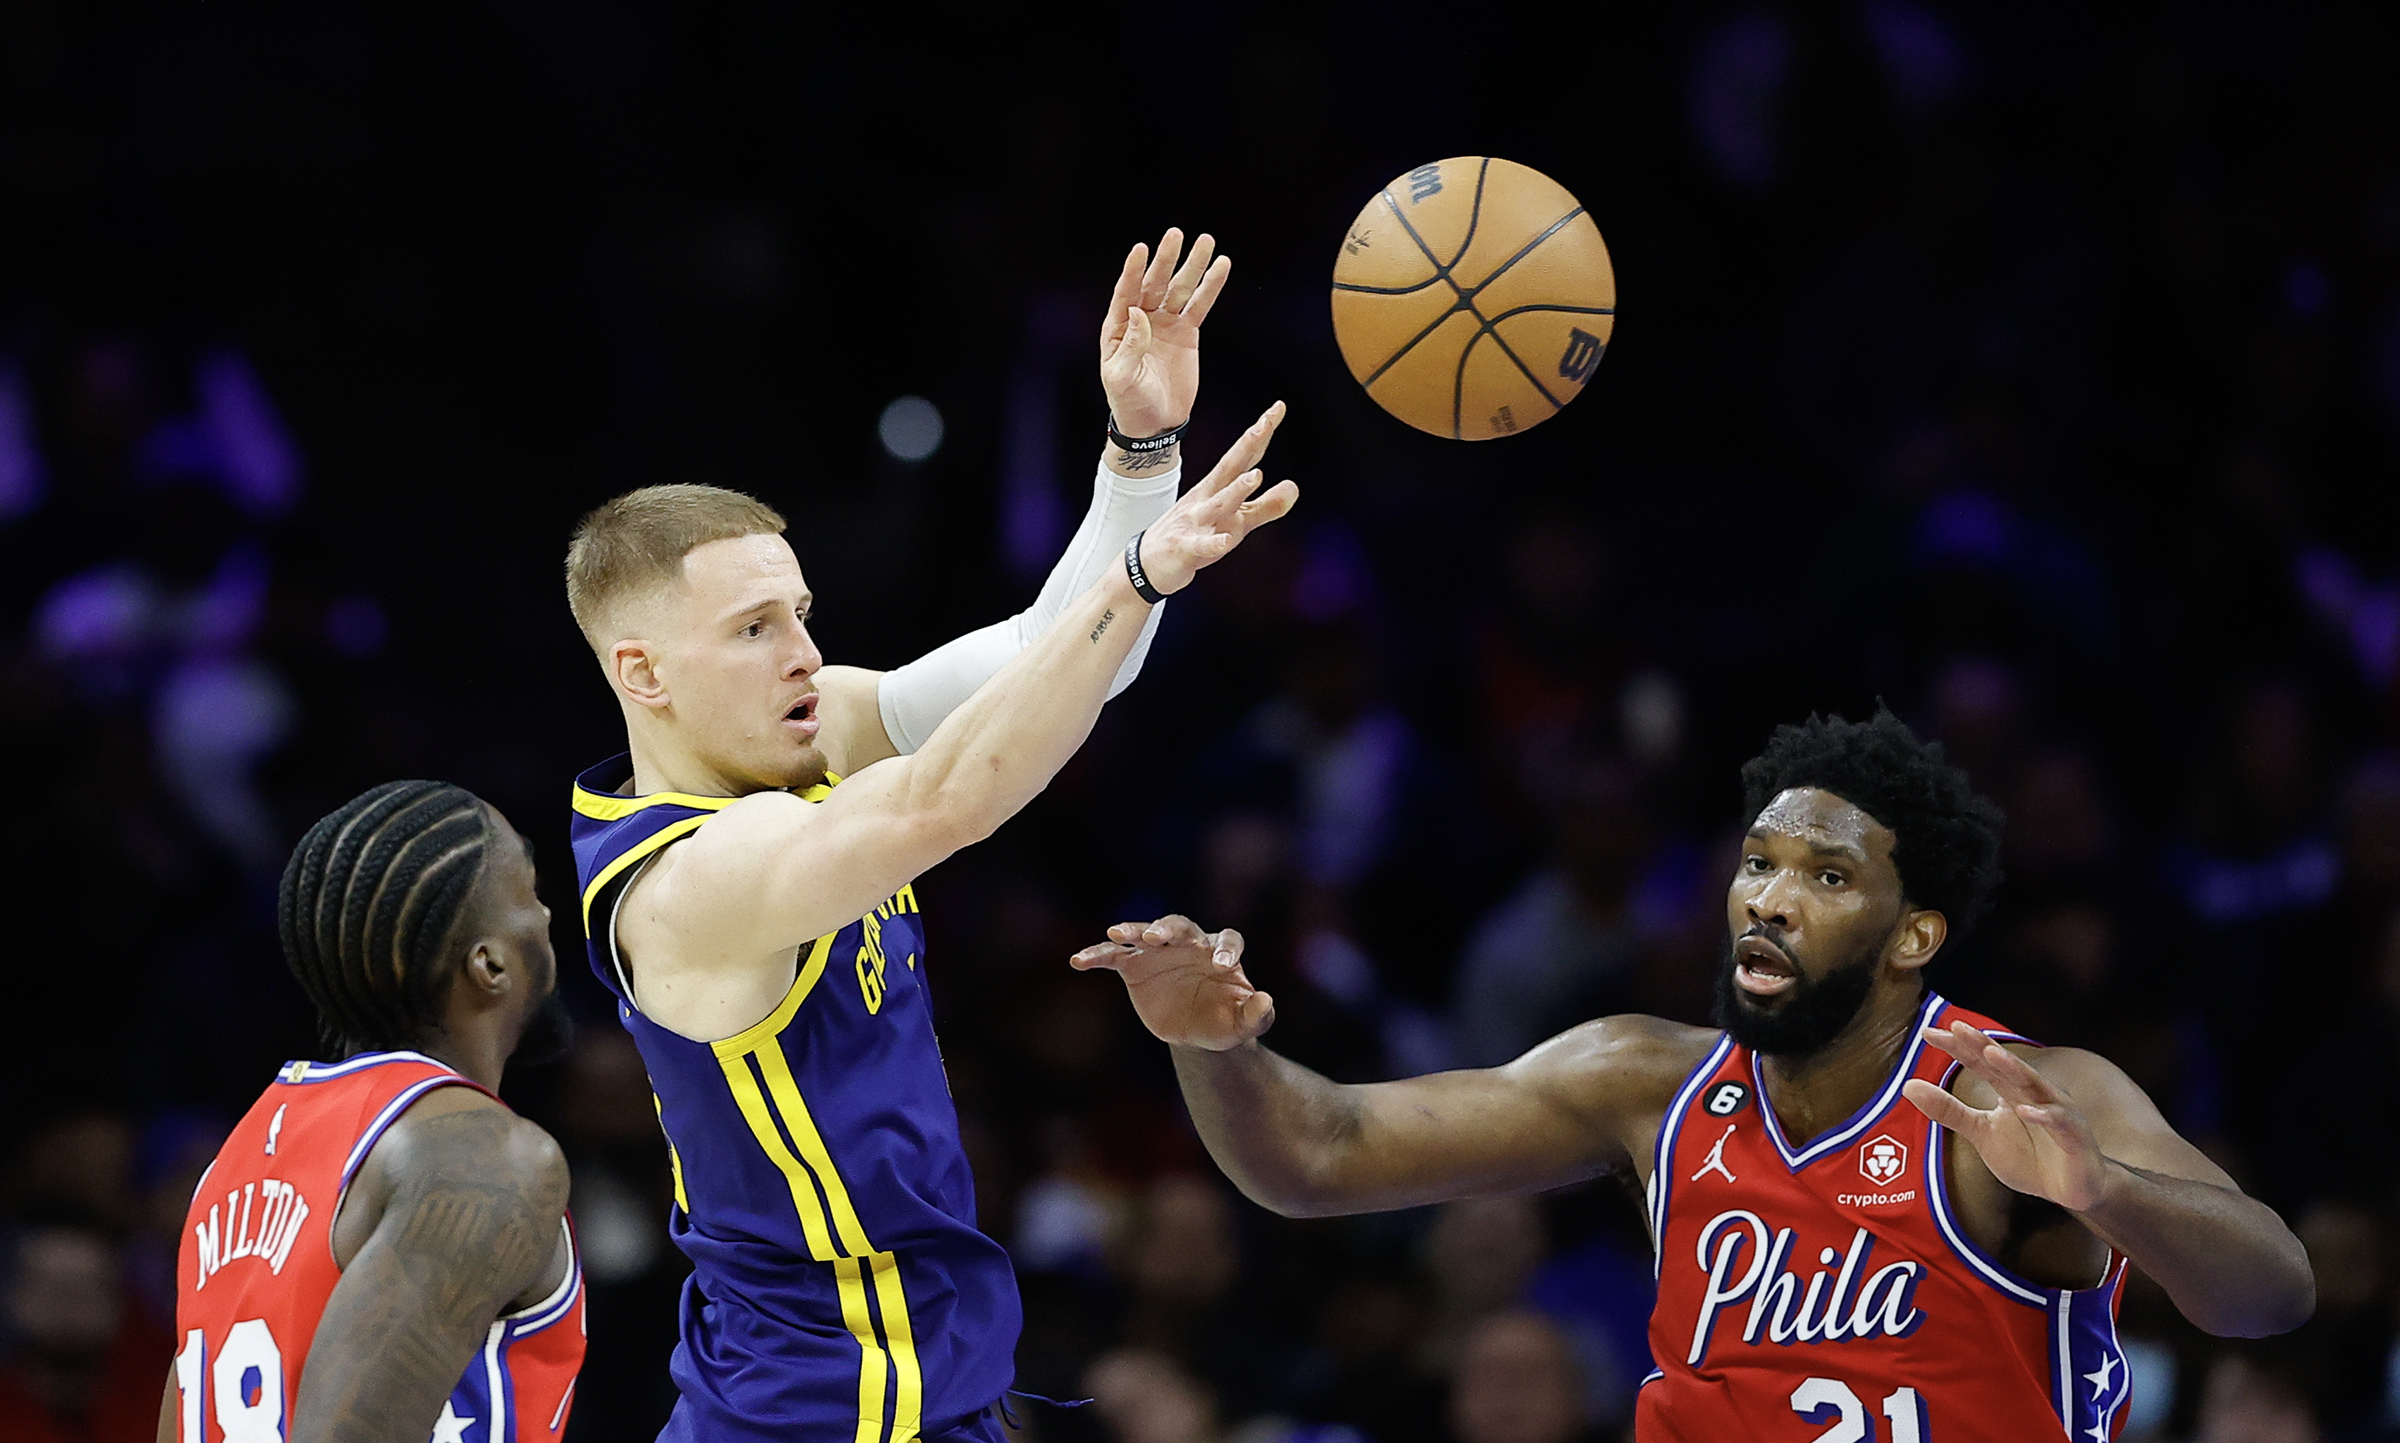 Photos: Donte DiVincenzo's Journey to the Warriors Photo Gallery